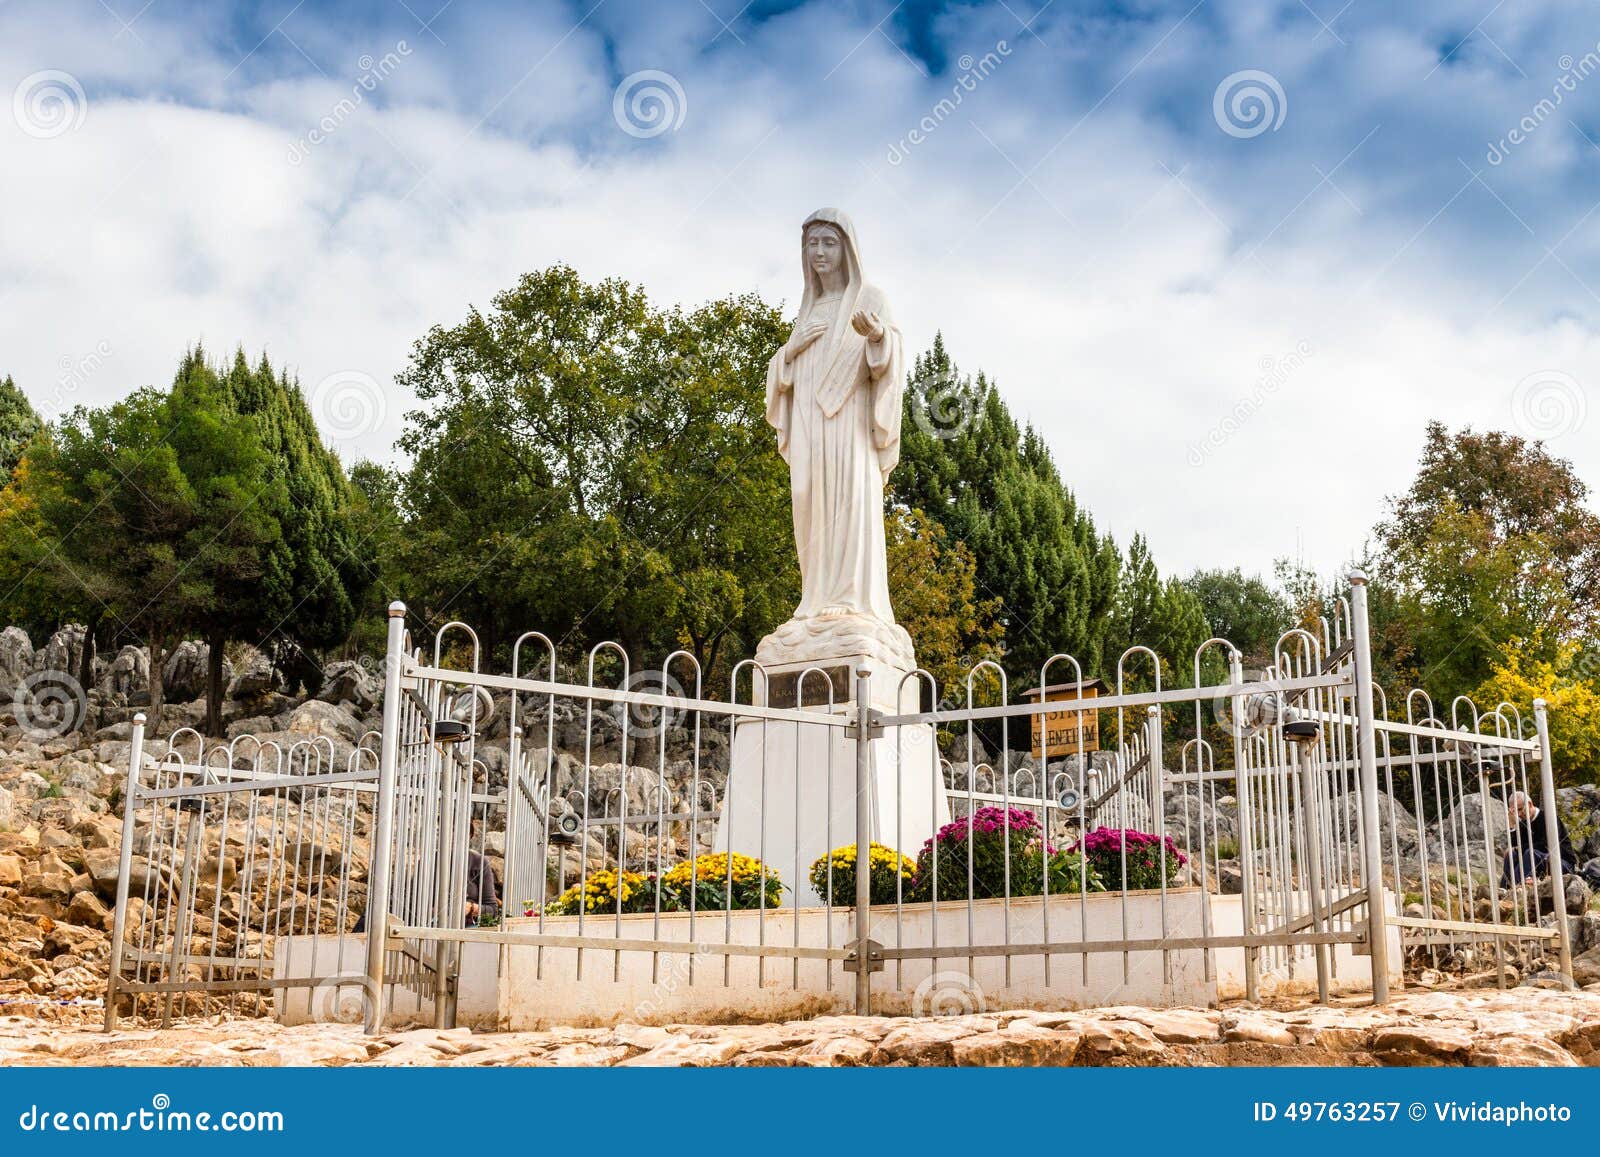 blessed virgin mary statue on apparition hill